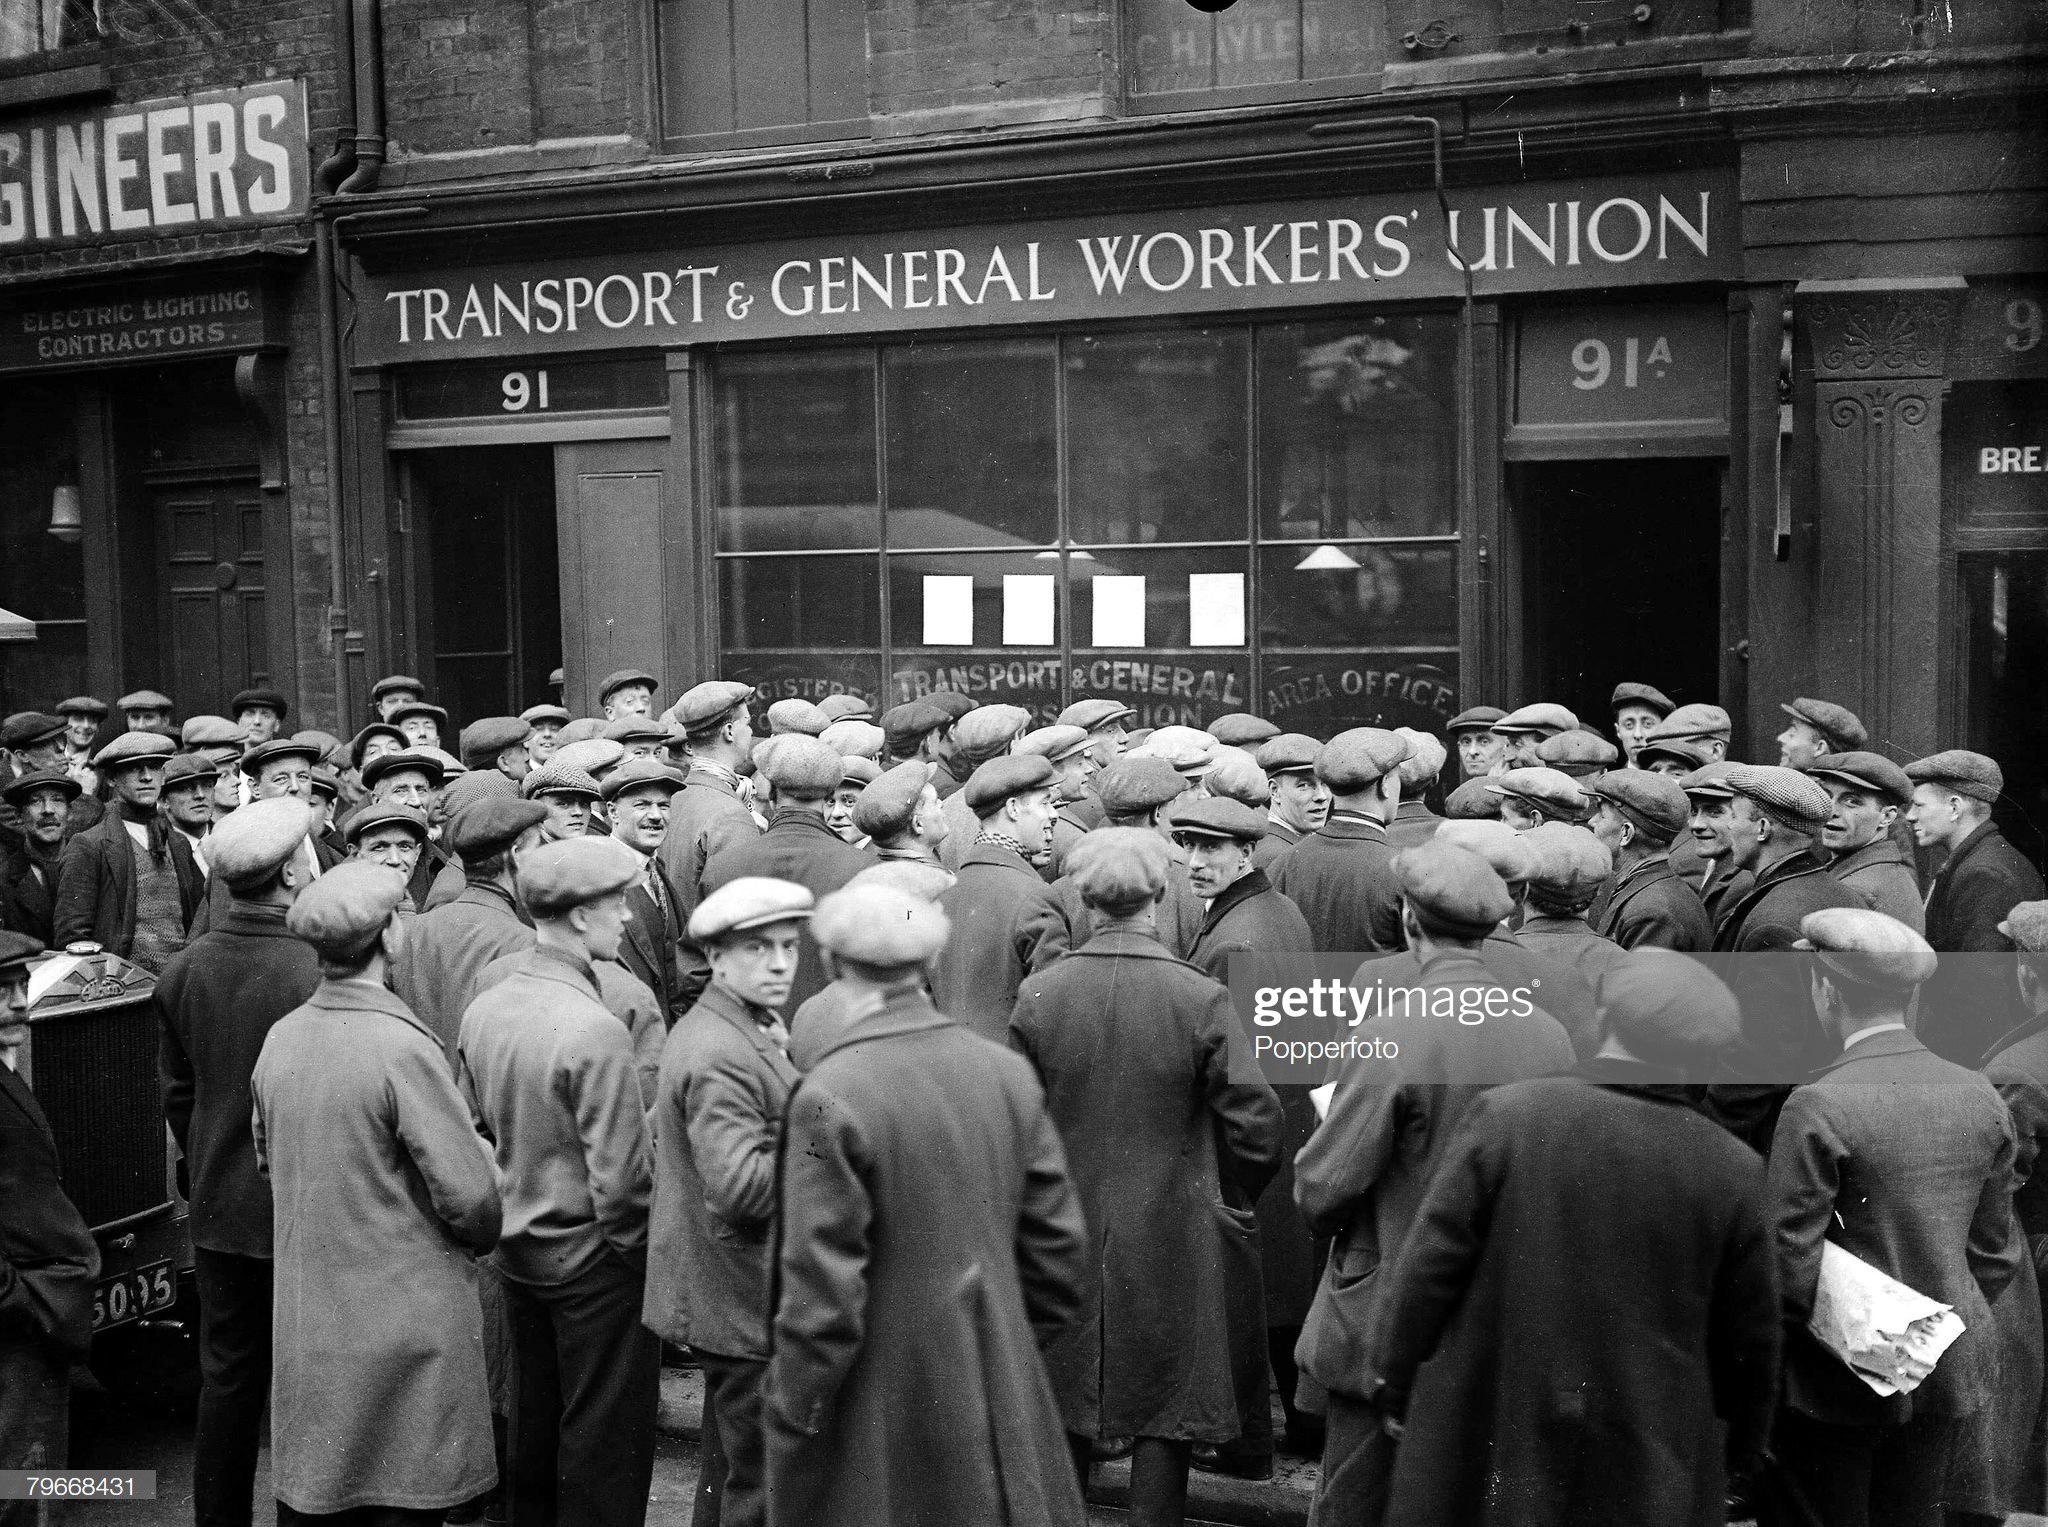 Tooley Street 1930, Striking shipyard workers gather outside the Transport & General Workers Union office during the dock strike. x.jpg